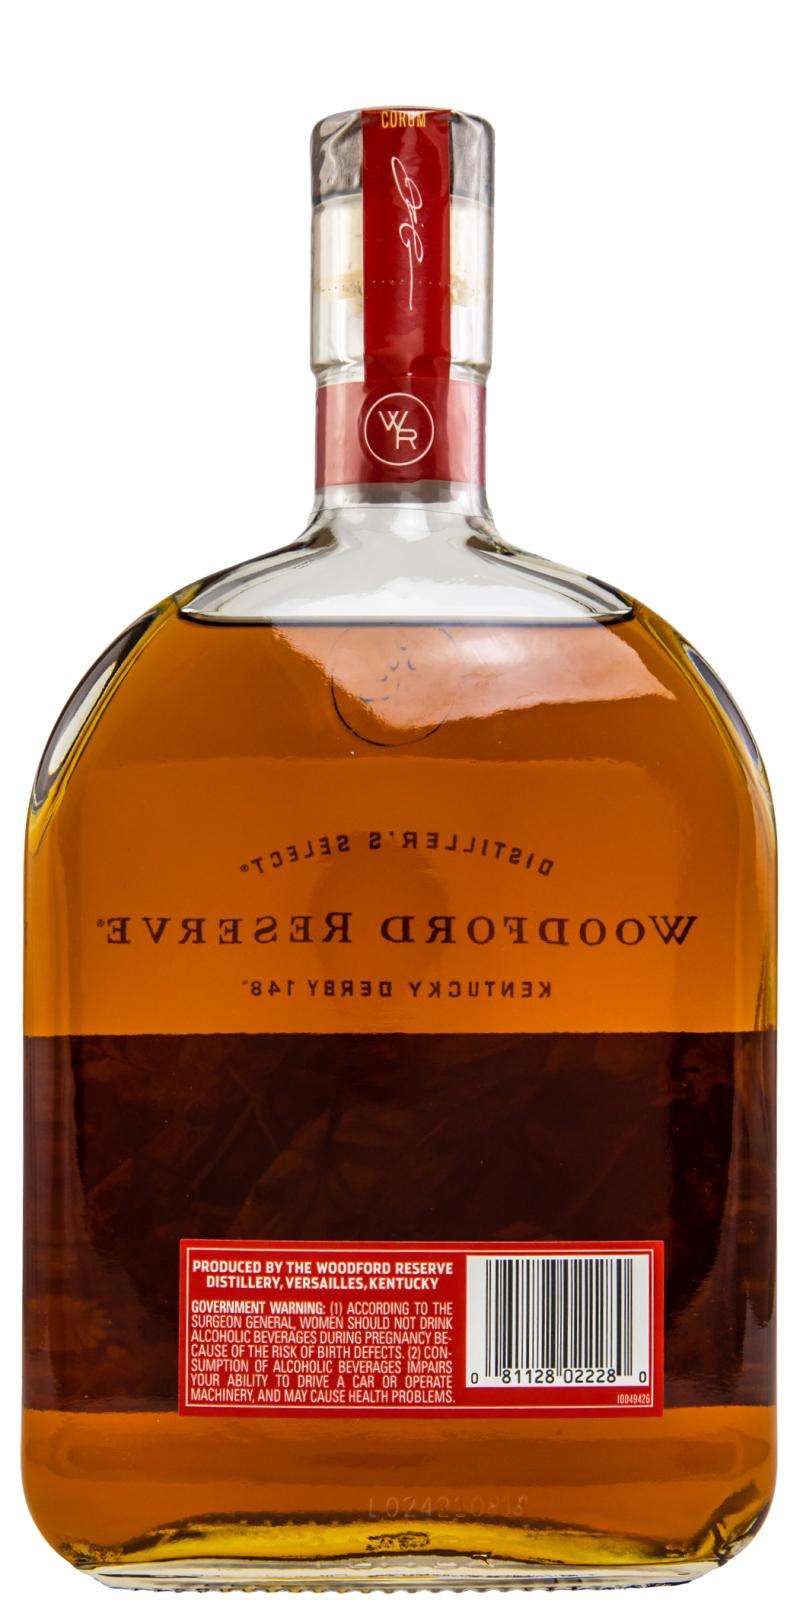 Woodford Reserve Kentucky Derby 148 Ratings and reviews Whiskybase